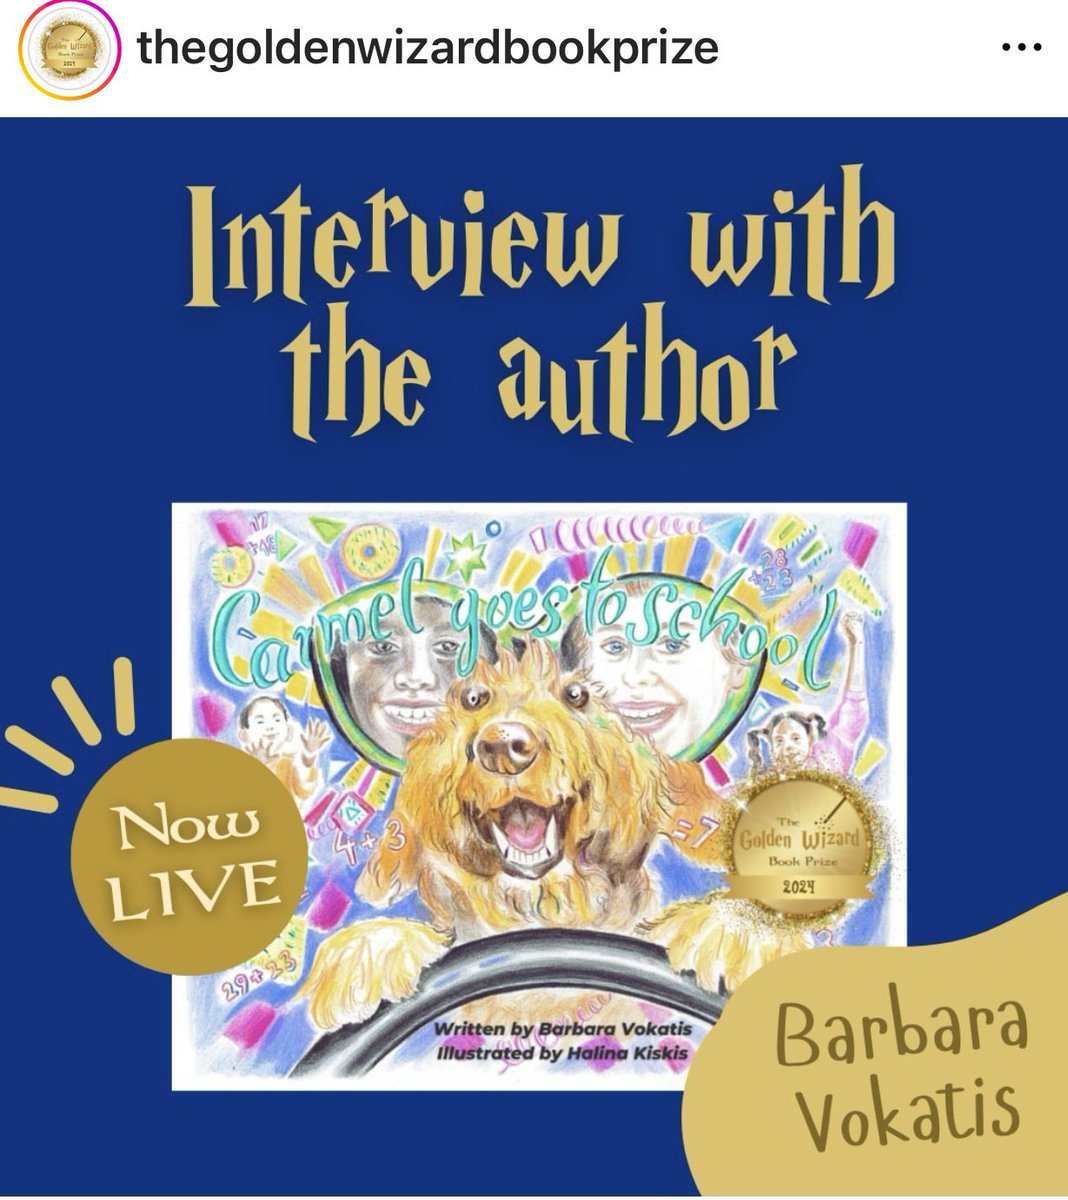 We have to post about this interview again because we are so proud! Thank you, The Golden Wizard Book Prize! Interview can be accessed here or in the first link in my bio: thegoldenwizardbookprize.com/post/interview… #childrensbook #dogbooks #therapydog